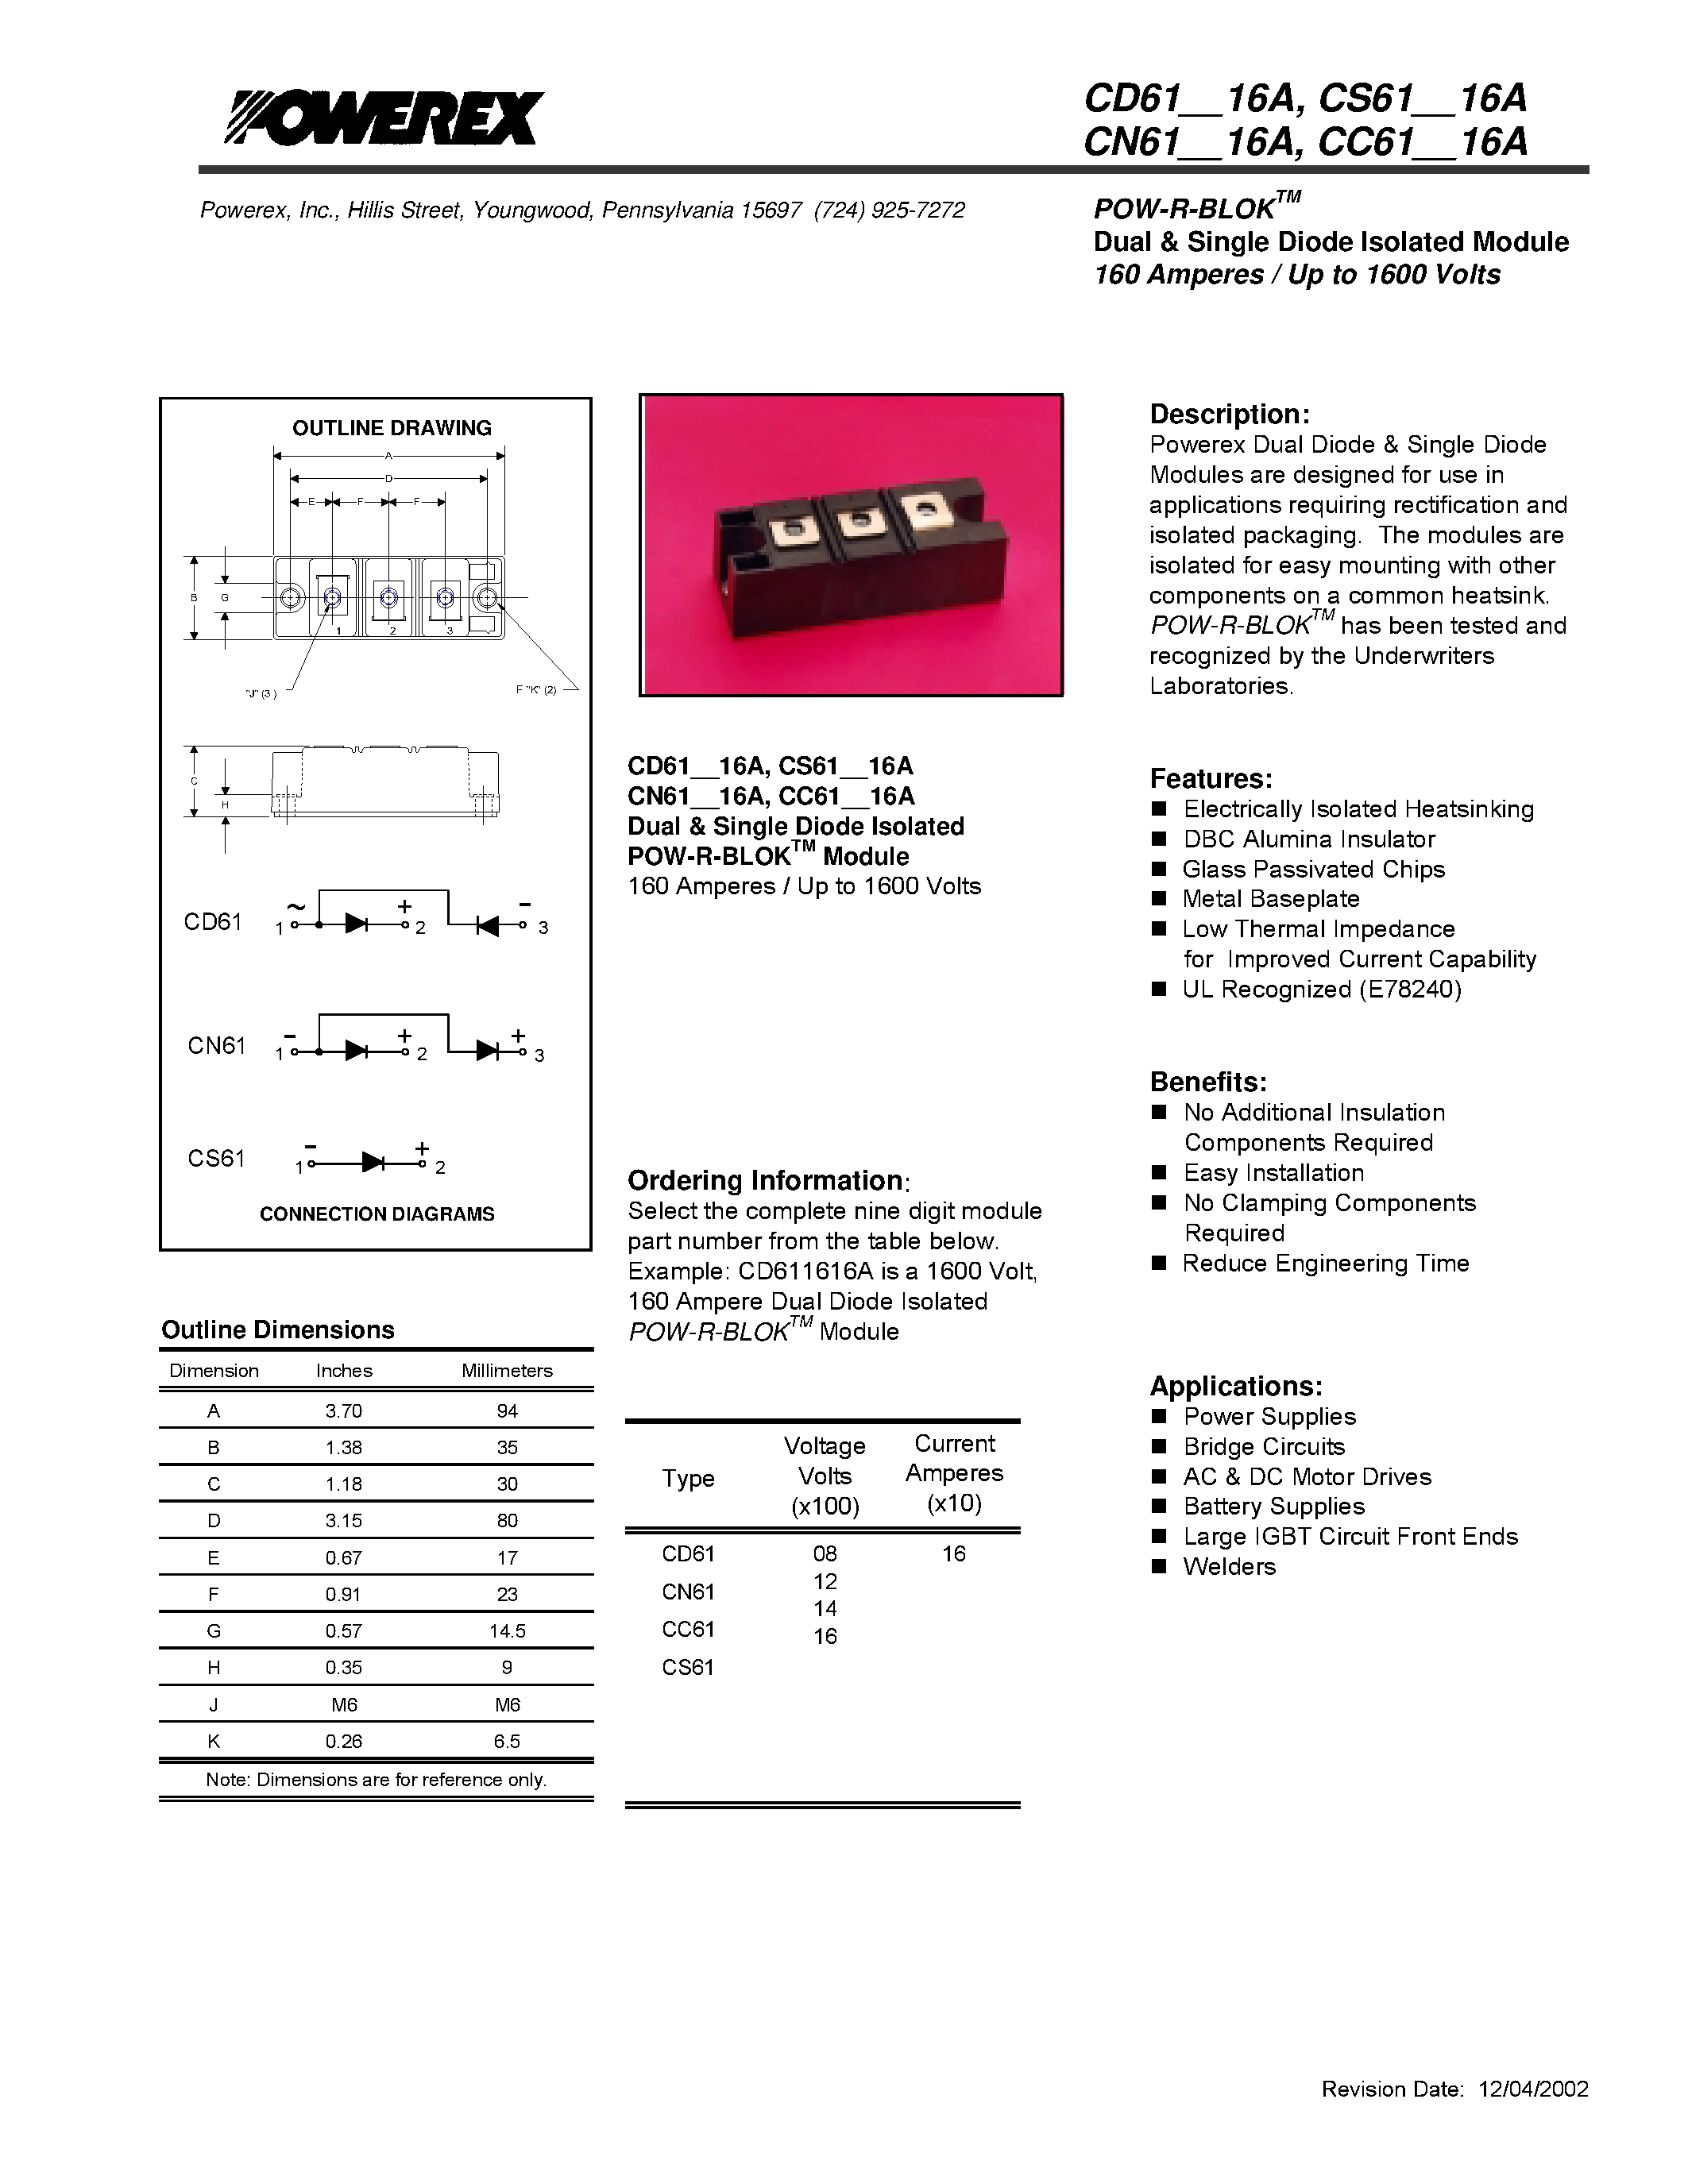 Datasheet CD611416A - POW-R-BLOK Dual & Single Diode Isolated Module 160 Amperes / Up to 1600 Volts page 1